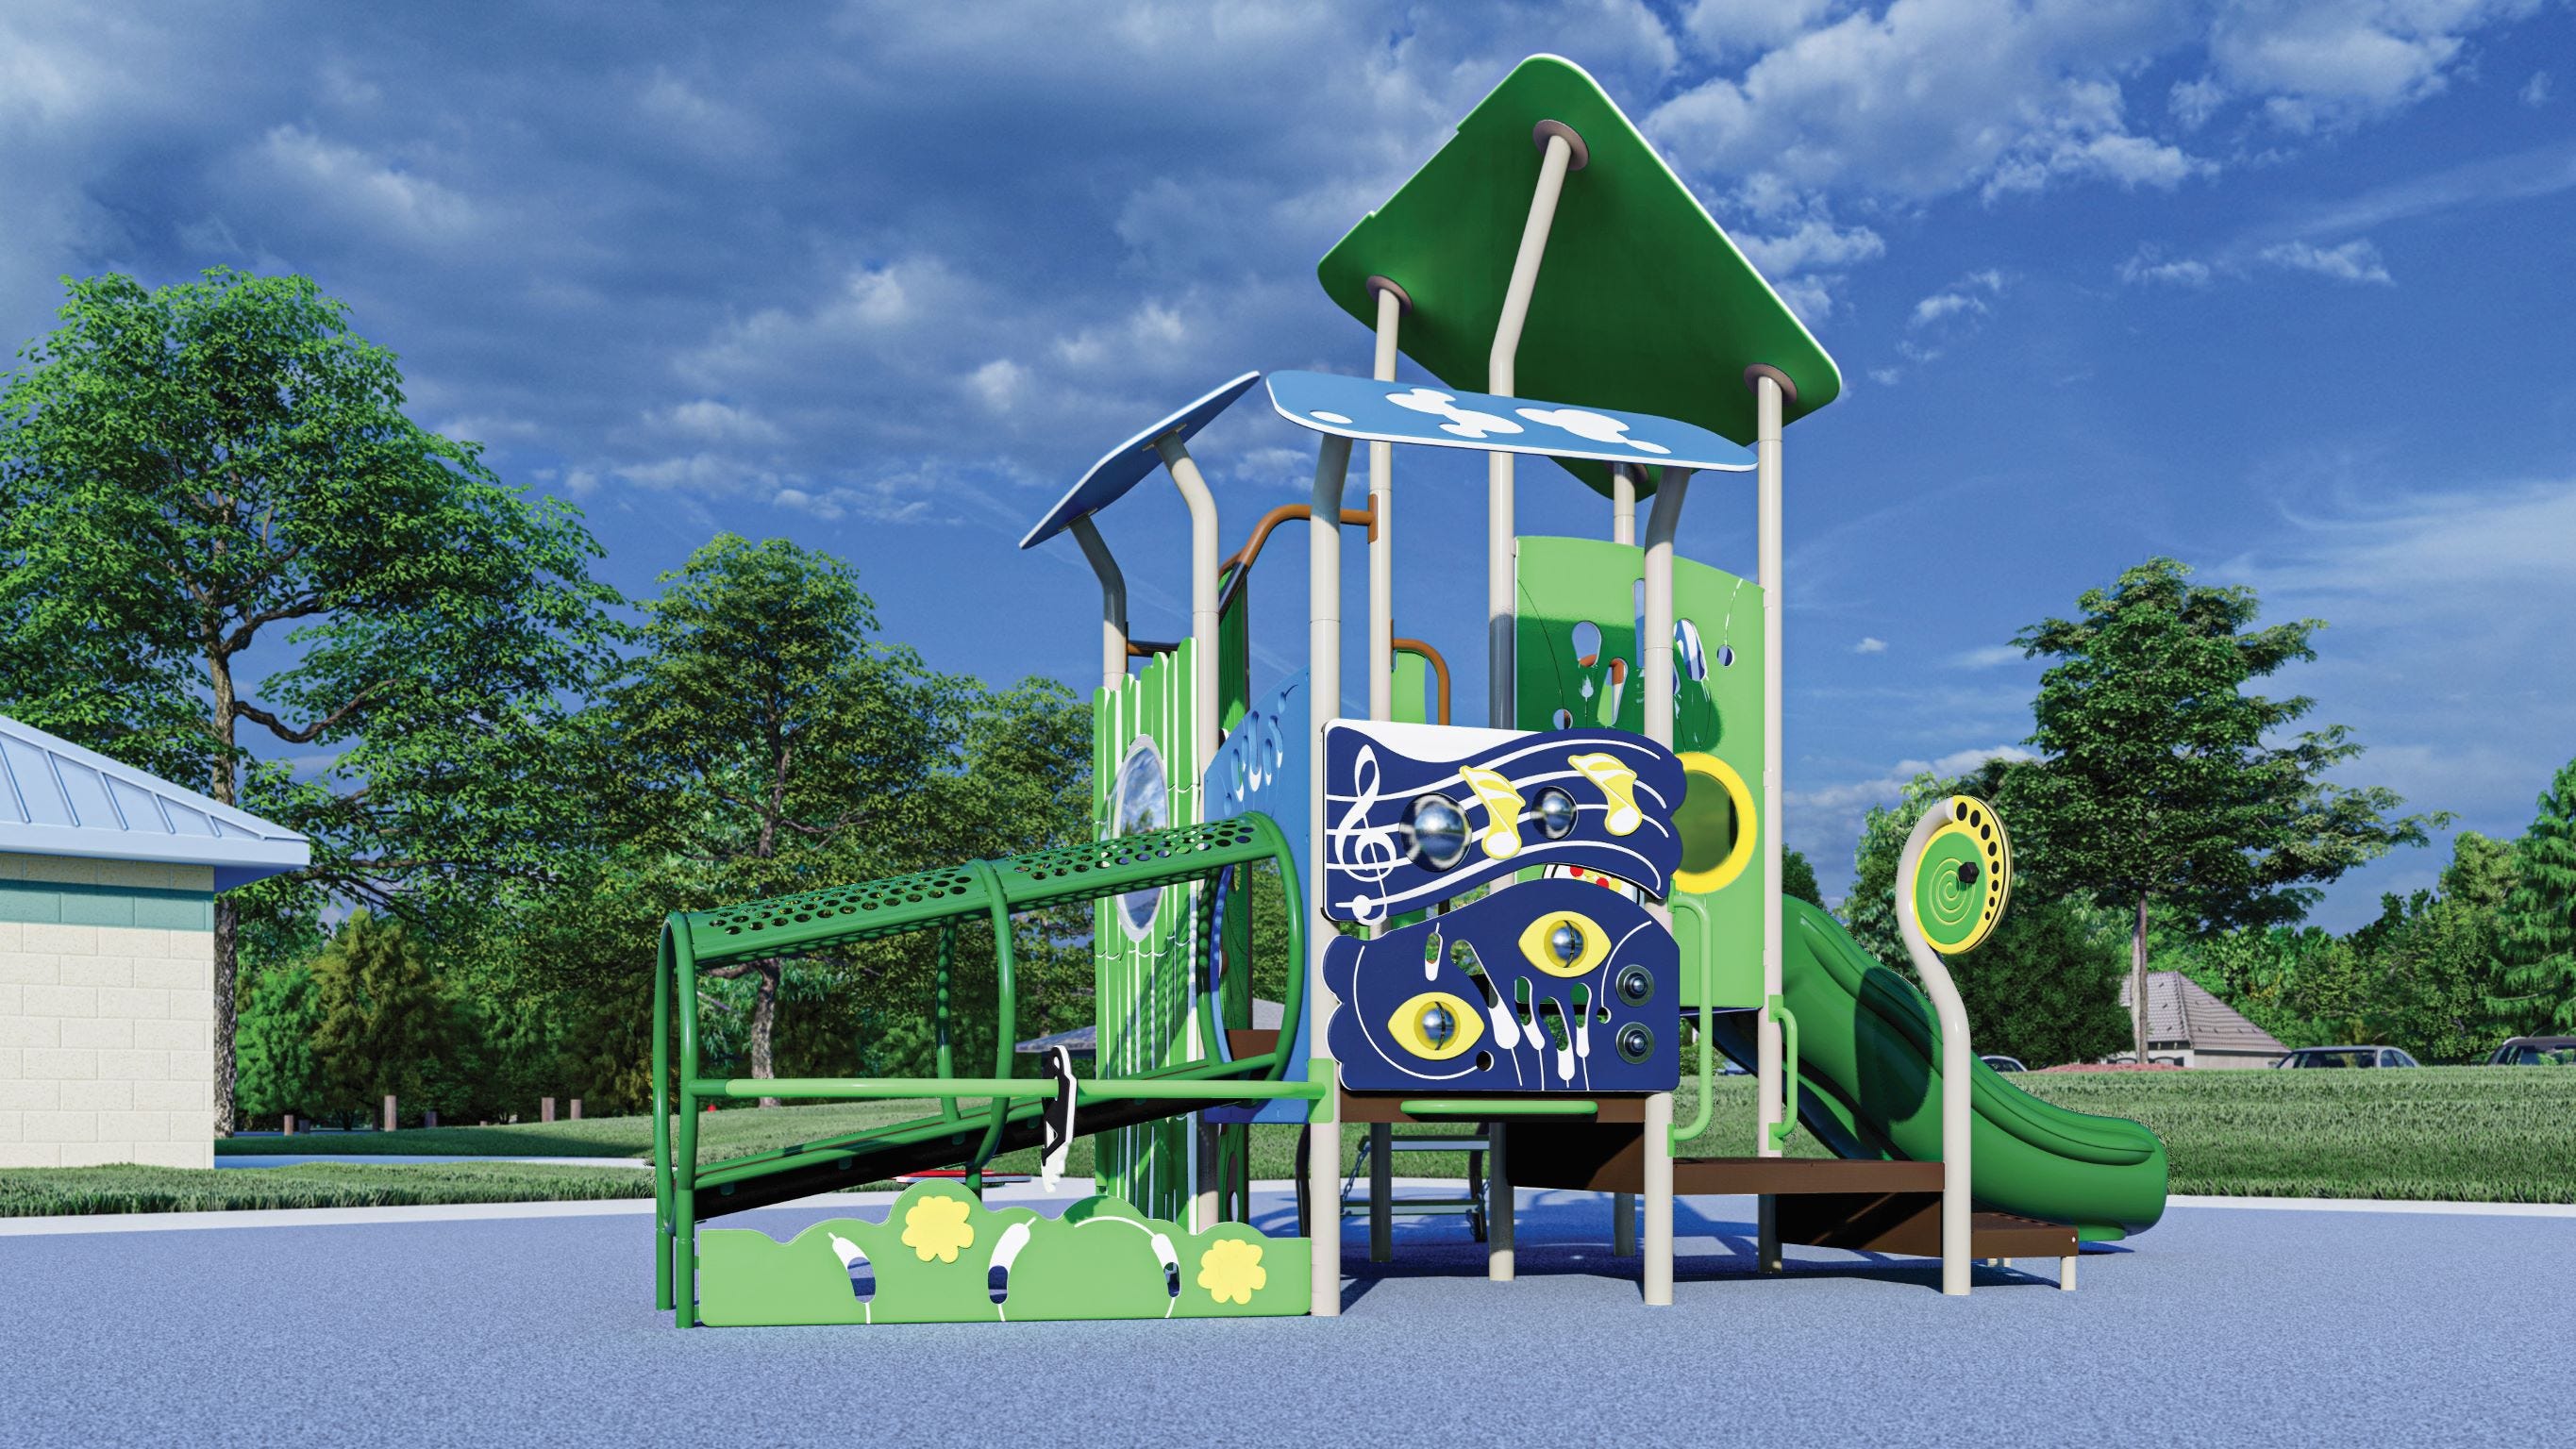 Larger green and blue play system